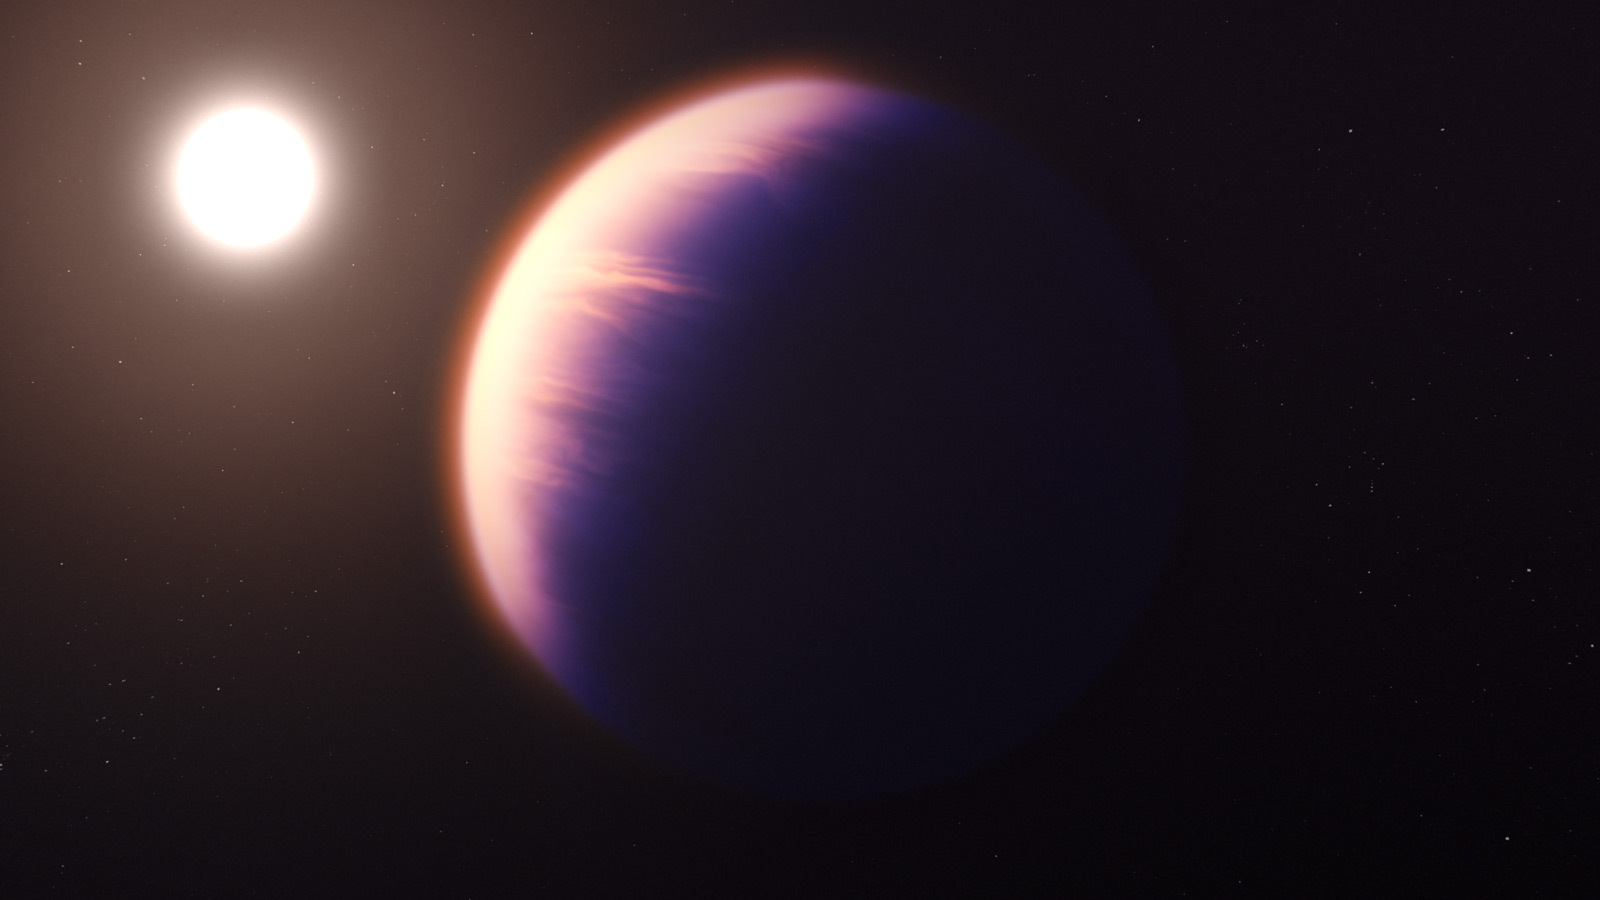 An illustration shows a gas giant exoplanet close to its yellow star in the black of space. The planet is yellowish and covered in cloud layers.